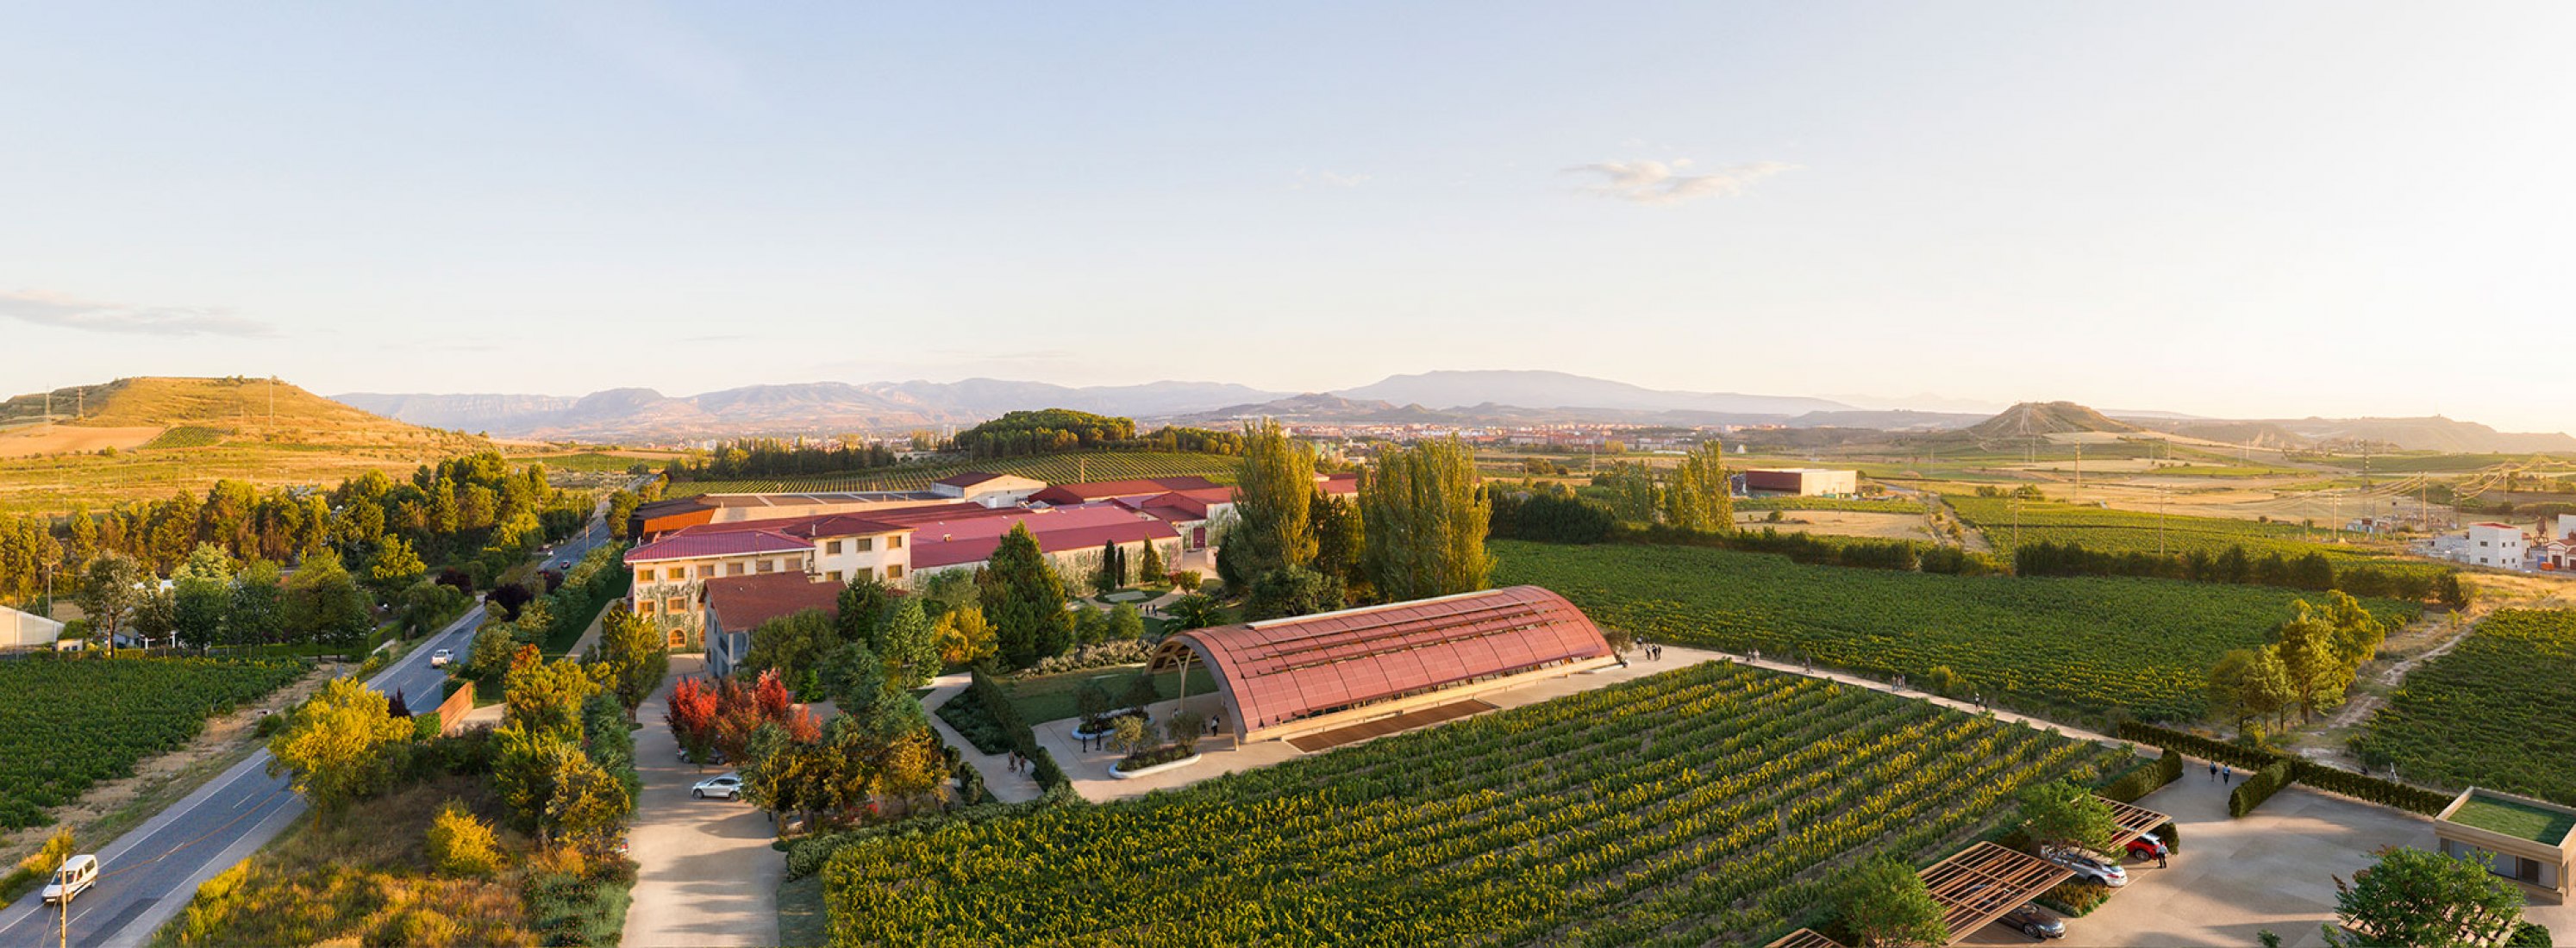 Faustino Winery remodeling proposal. Photograph courtesy of Foster + Partners.